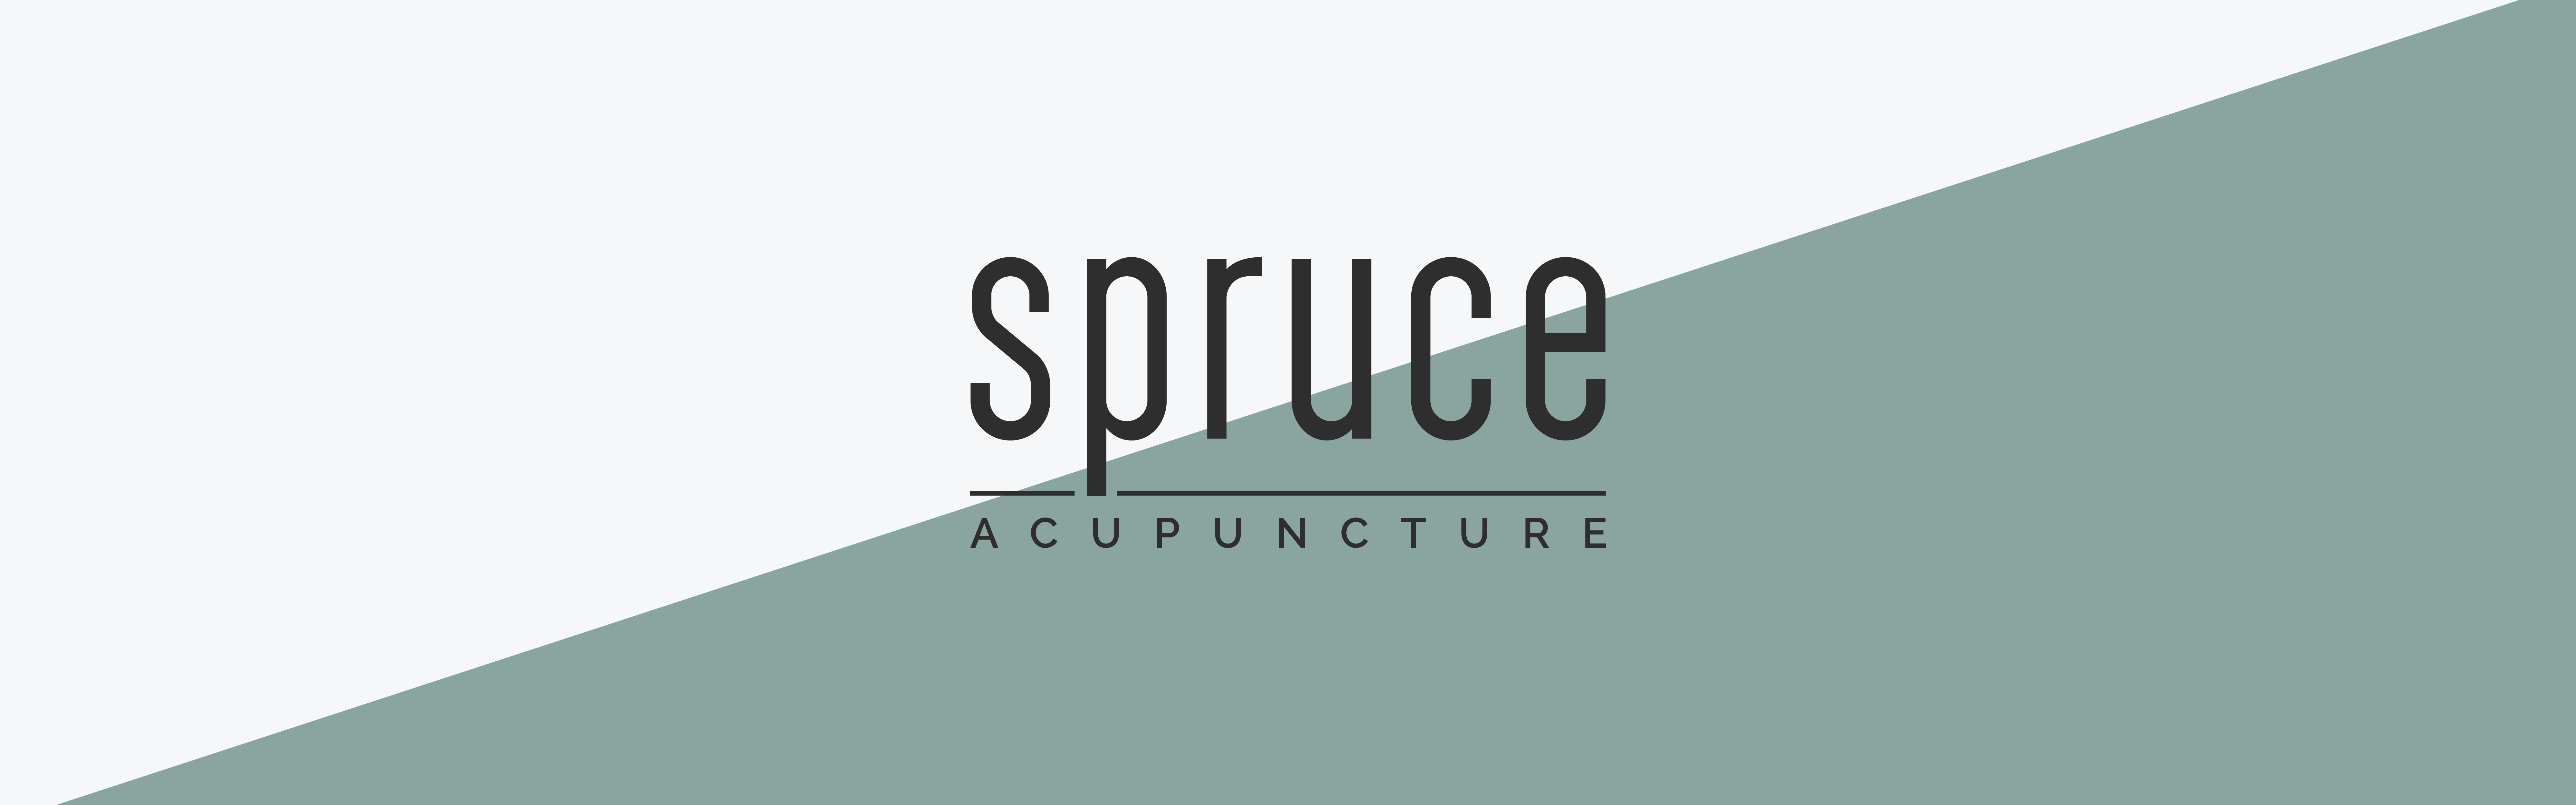 Logo of "Spruce Acupuncture" with stylized text on a geometric background of overlapping light and dark grey triangles.